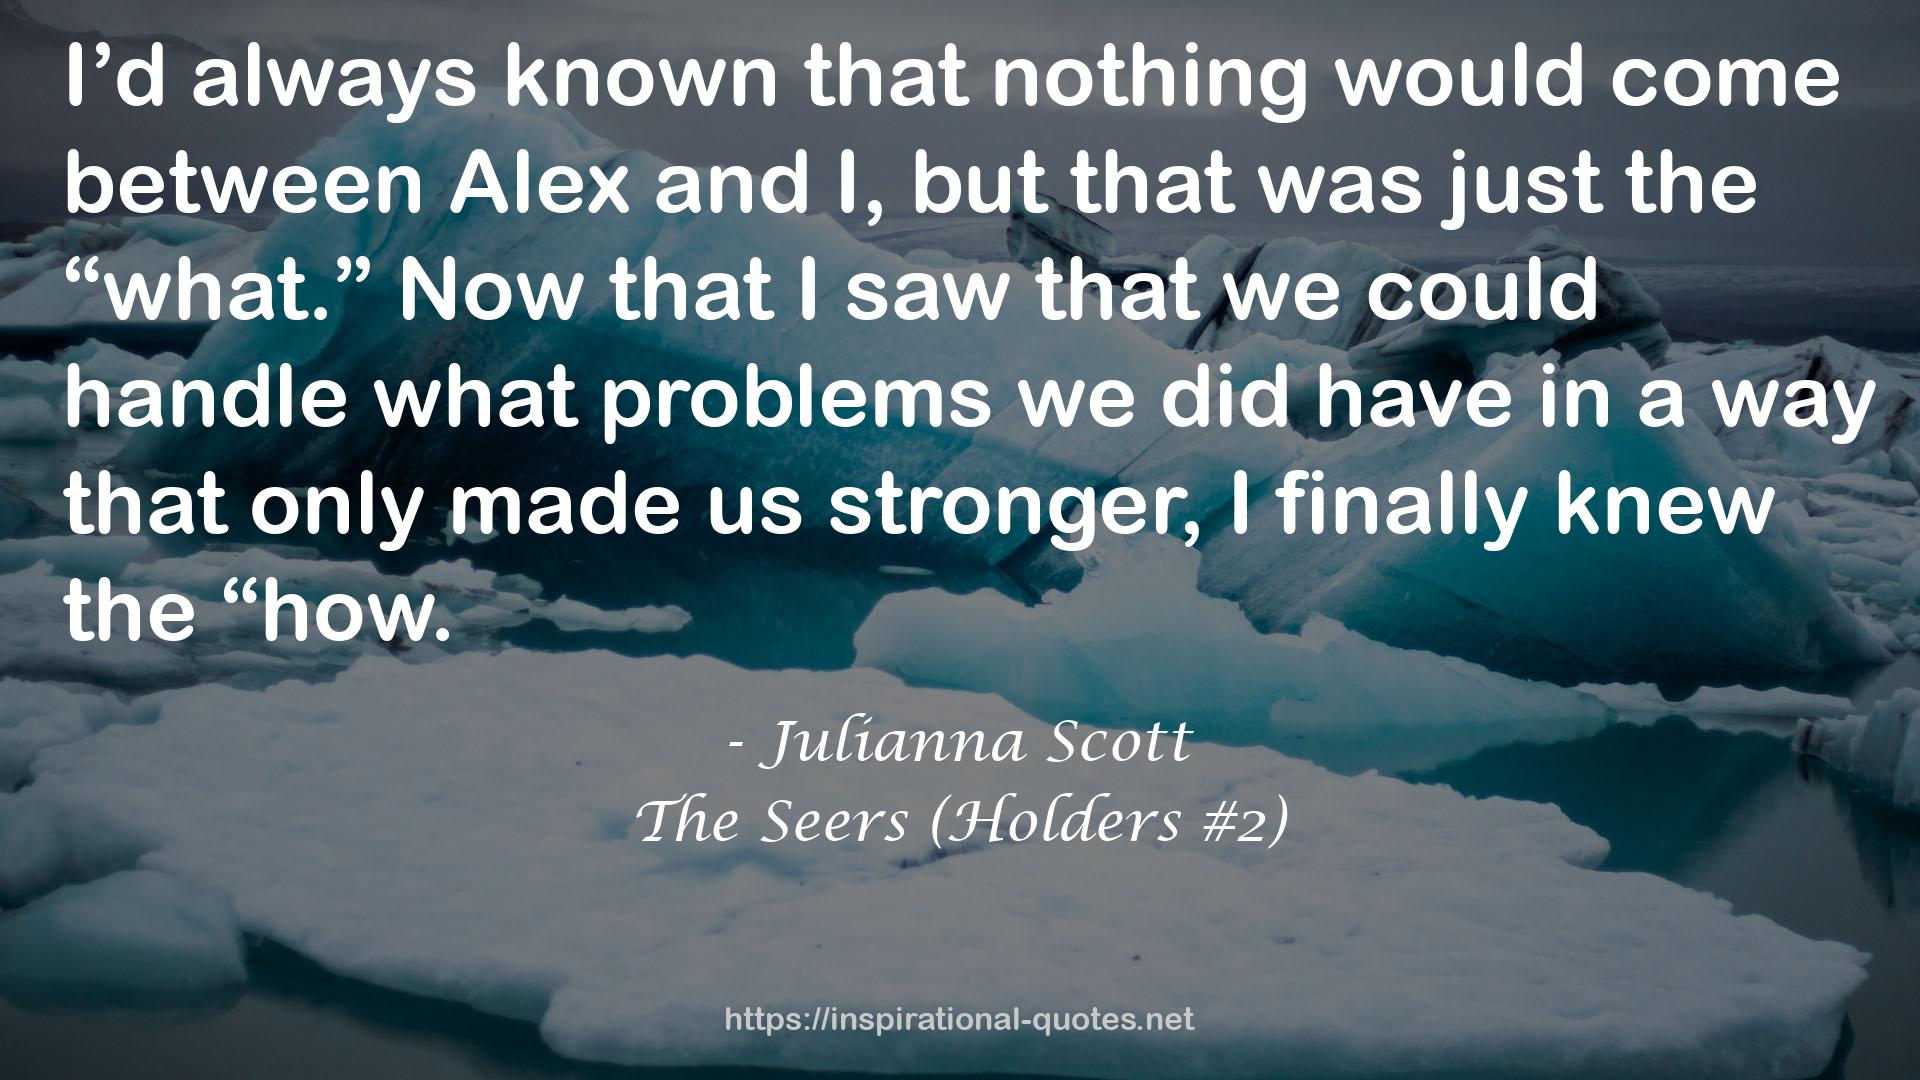 The Seers (Holders #2) QUOTES